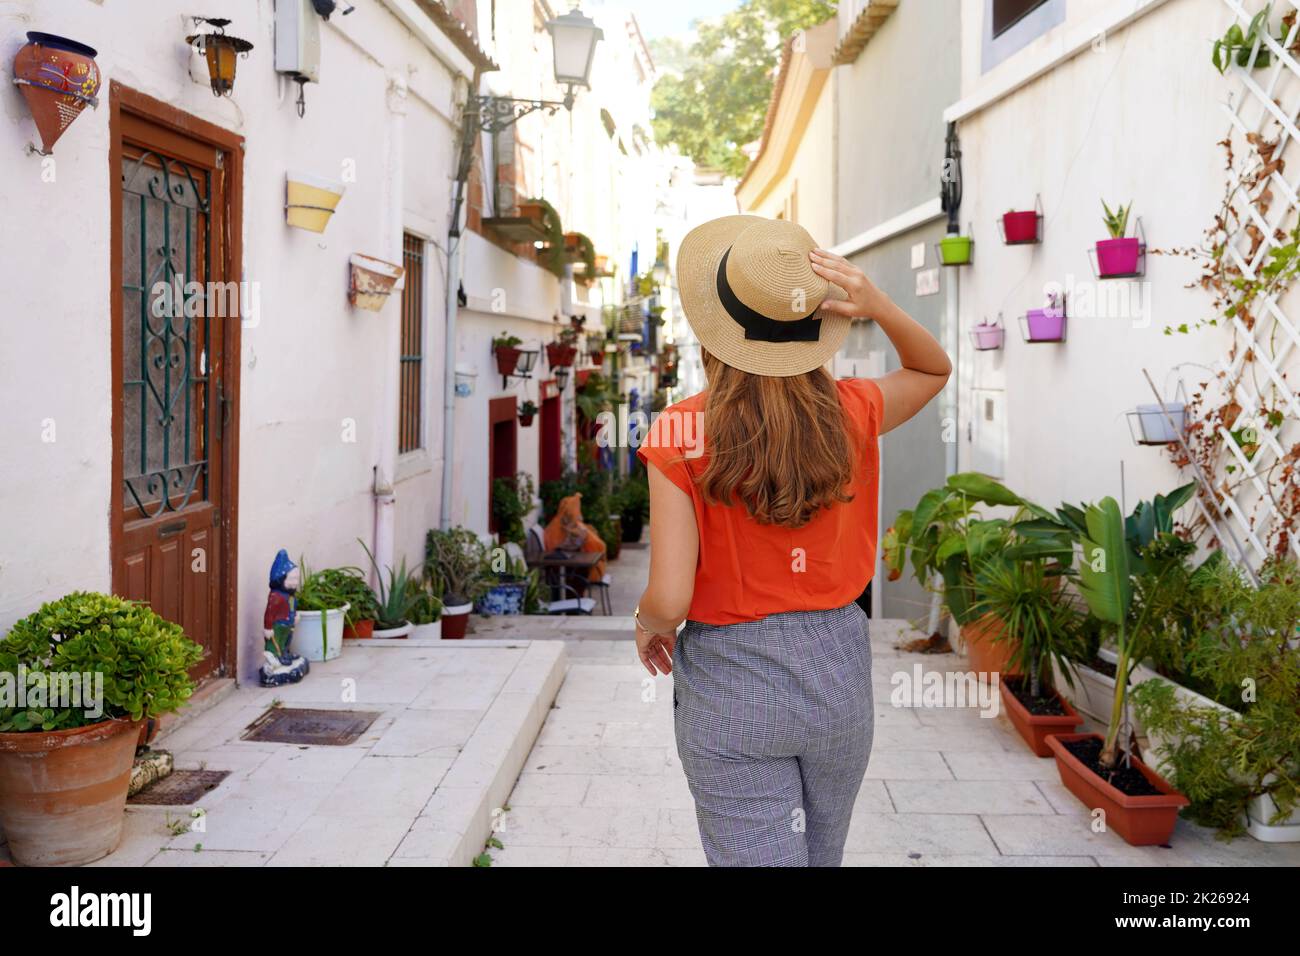 Visiting Alicante in Spain. Traveler woman visits the neighborhood Santa Cruz of Alicante in Spain. Tourist girl exploring european city with typical Mediterranean architecture and decoration. Stock Photo